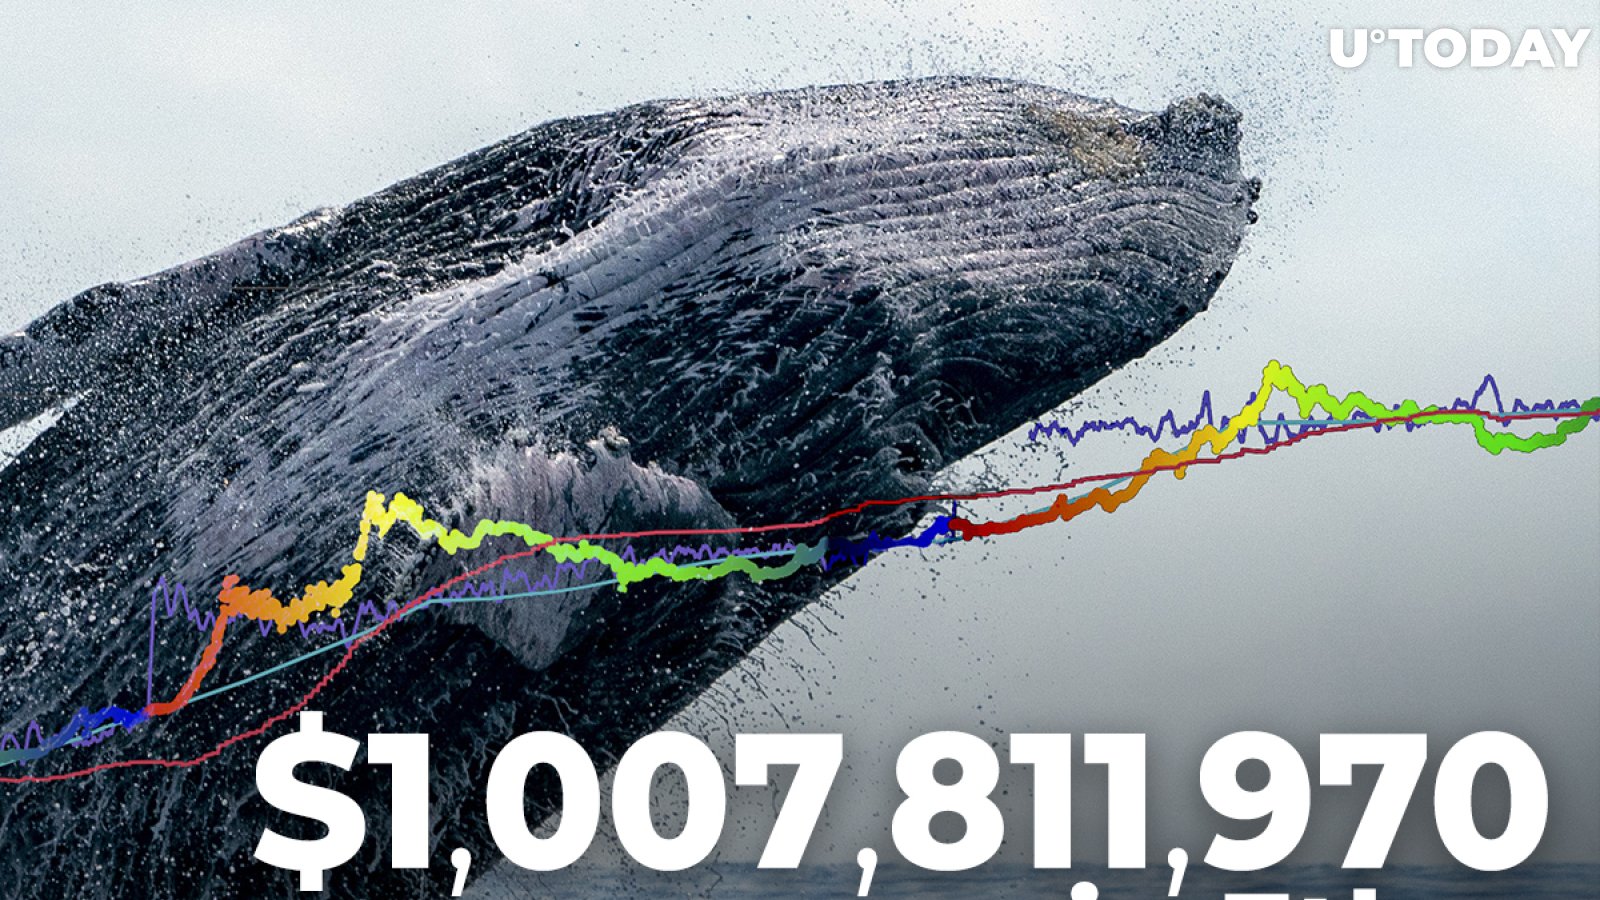 $1,007,811,970 in Ether Shifted by Whales and Major Crypto Exchanges